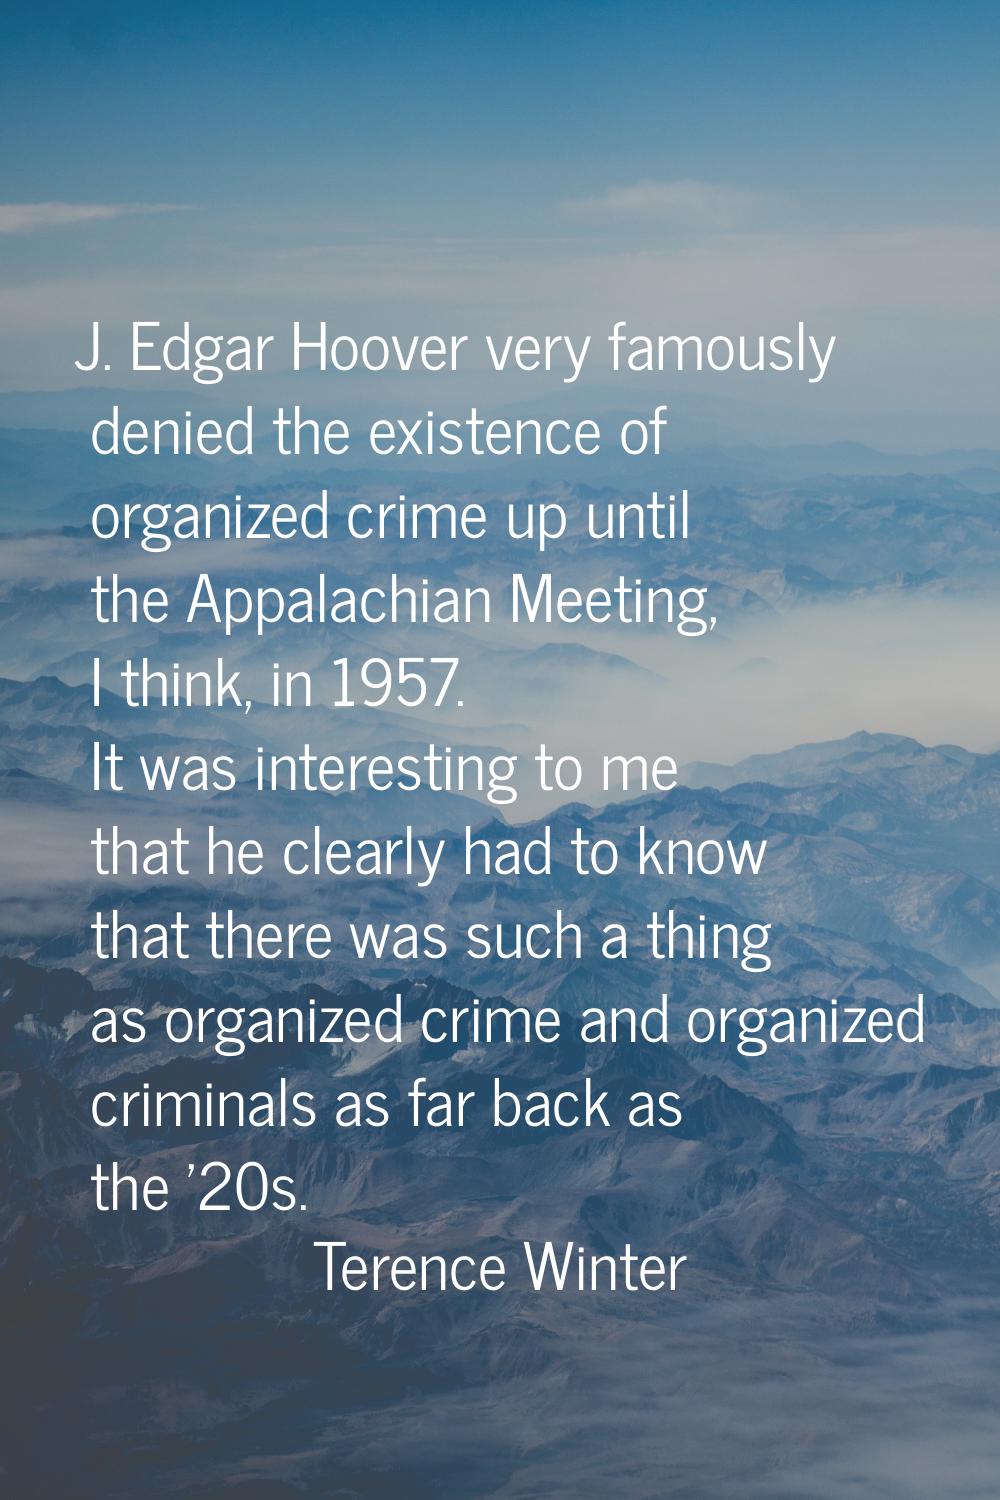 J. Edgar Hoover very famously denied the existence of organized crime up until the Appalachian Meet